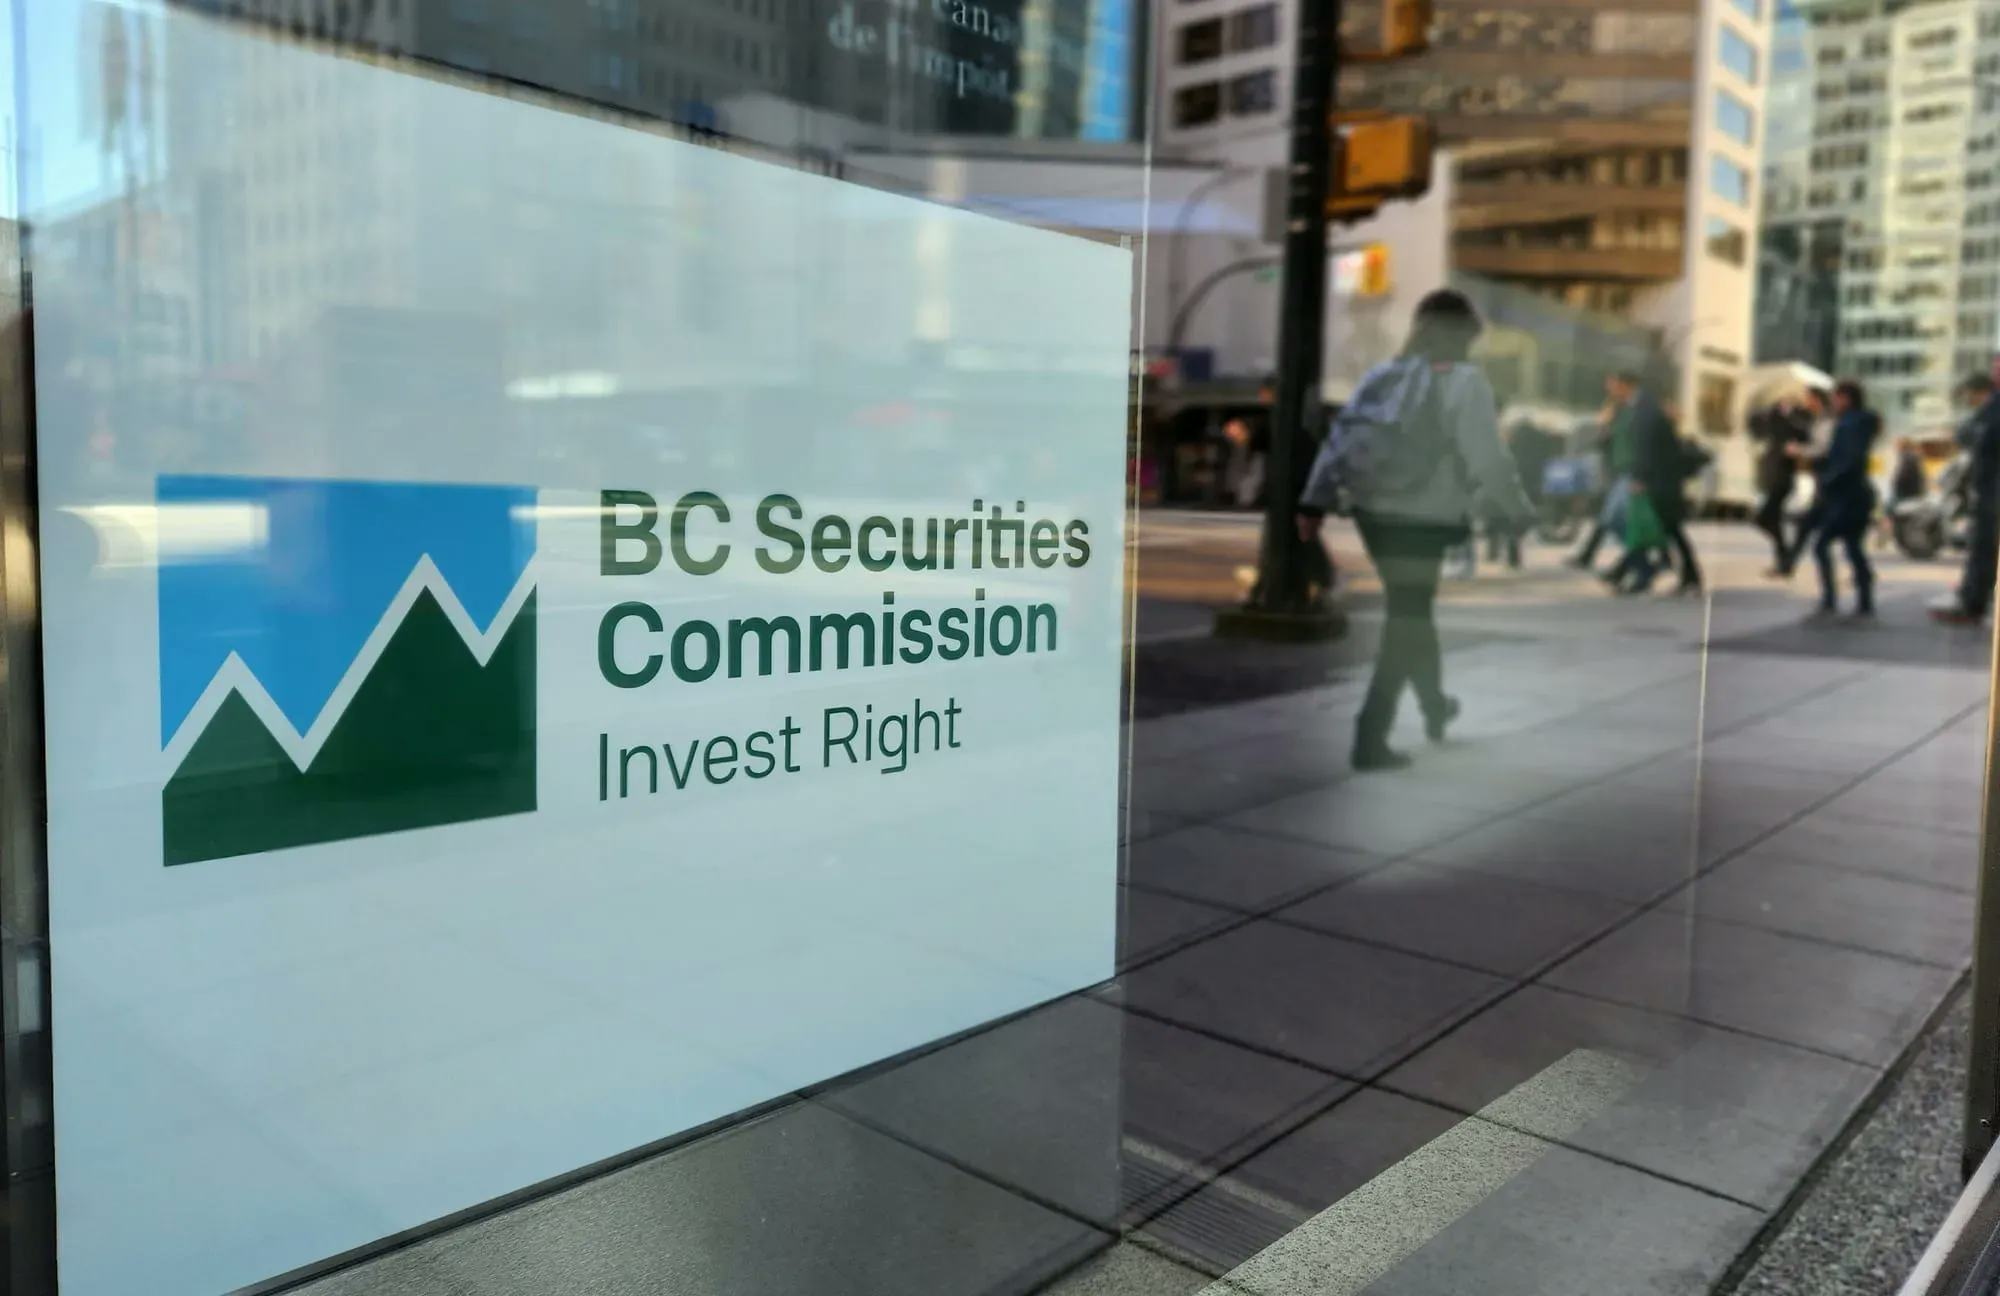 A sign showing the logo of the BC Securities Commission.